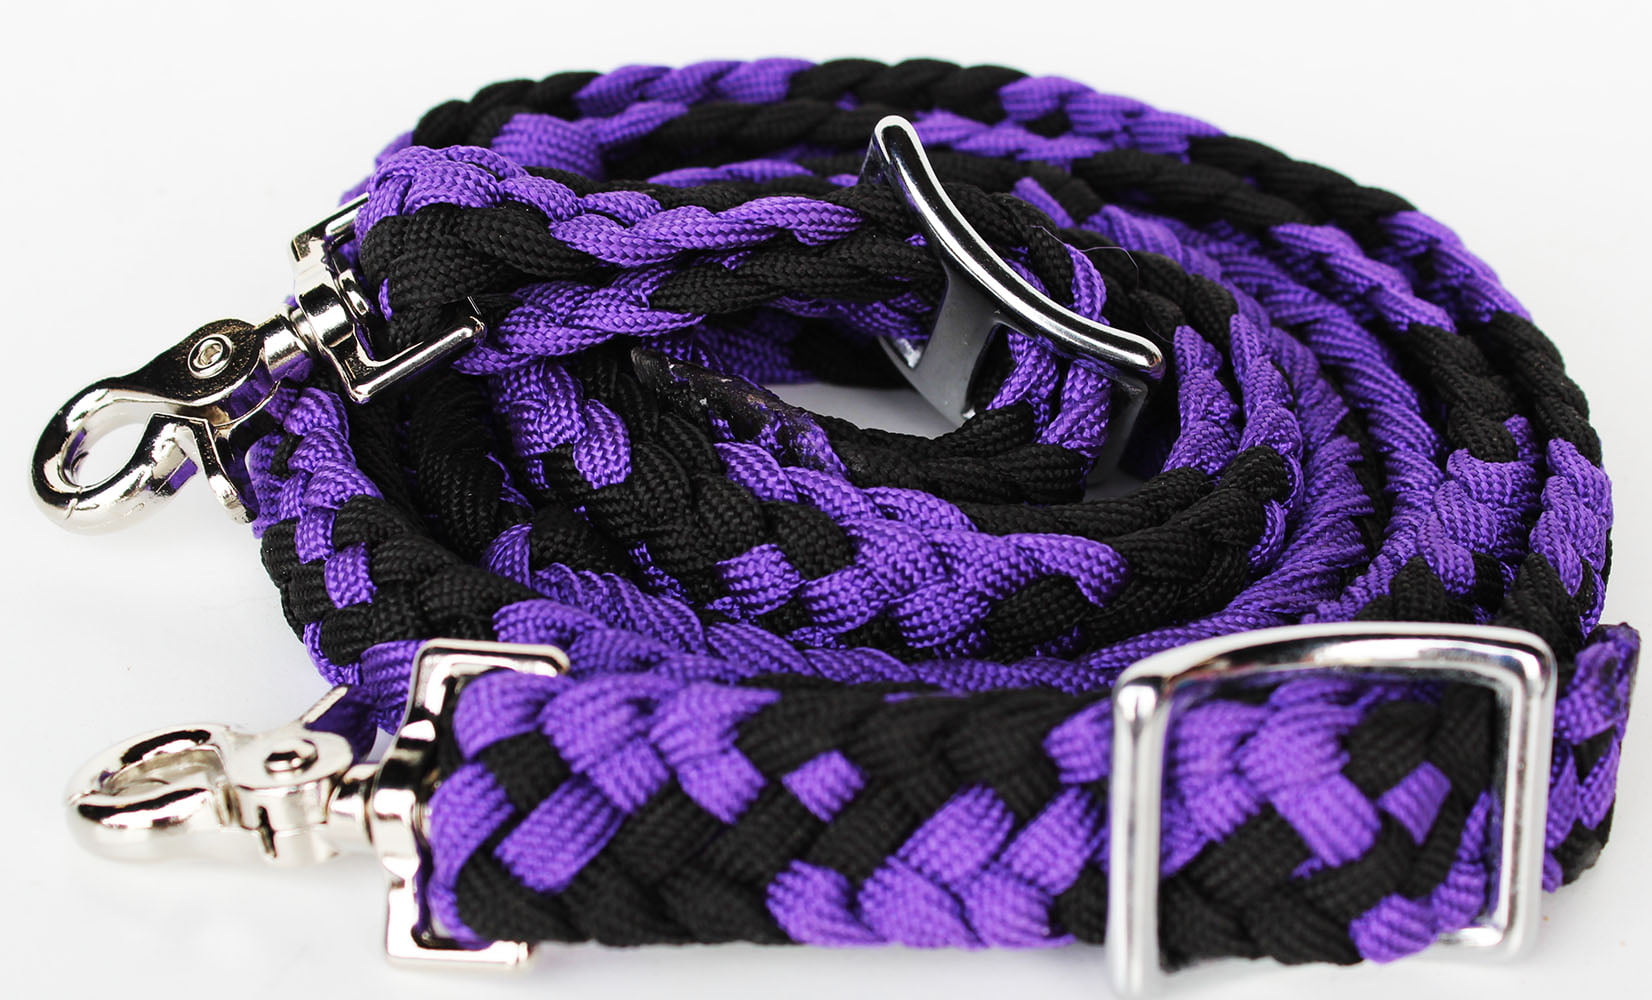 Horse Knotted Roping Western Barrel Reins Nylon Braided Rein Tack Purple 607132